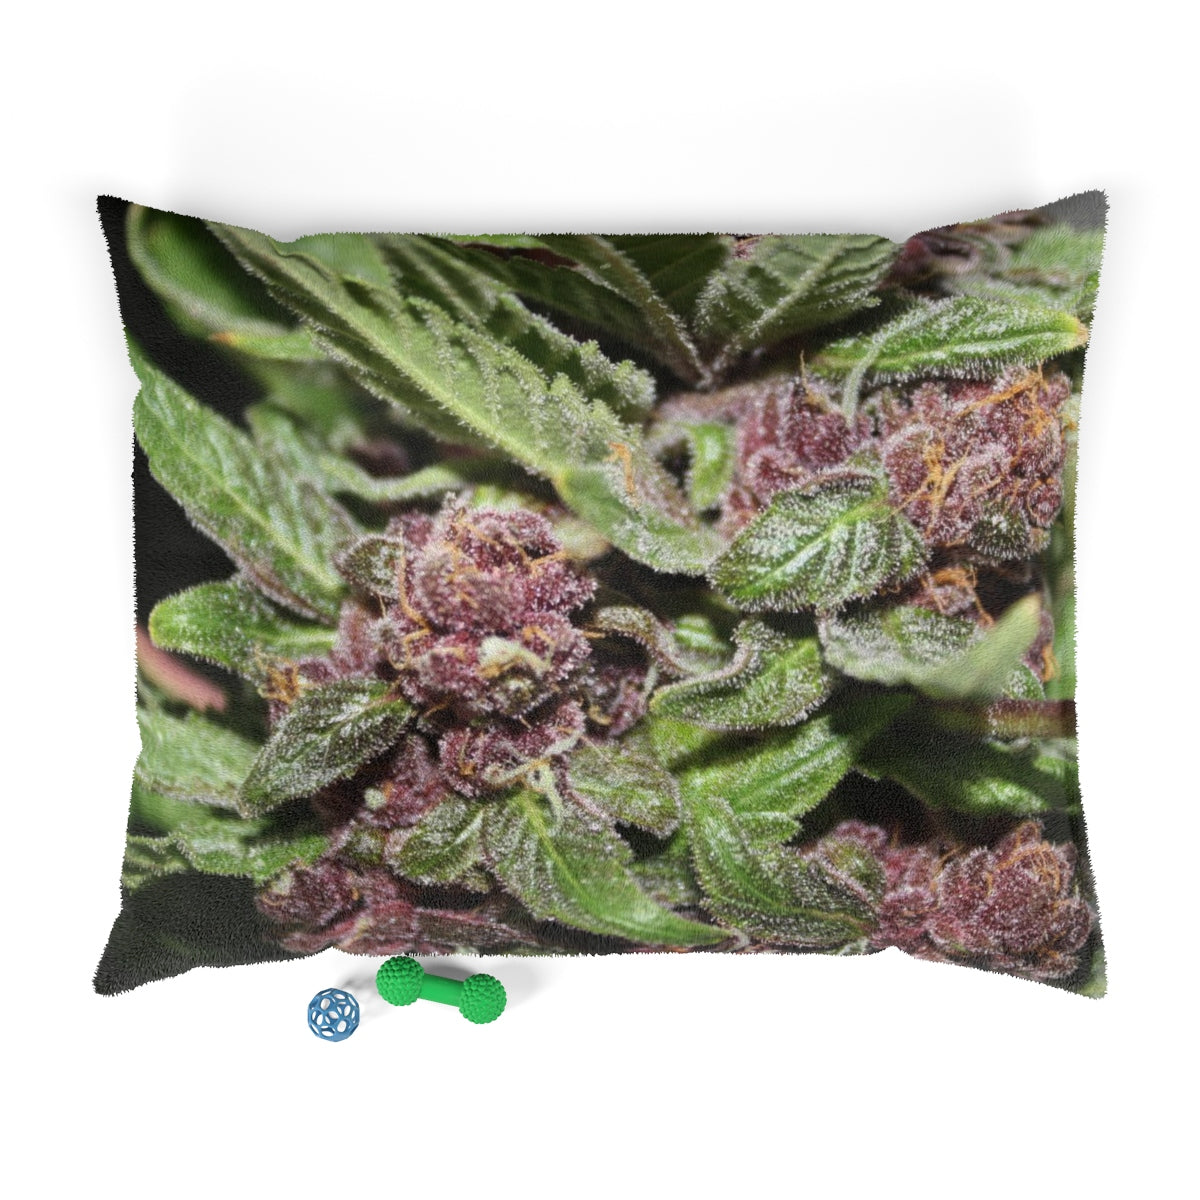 The Cannabis Bud Pet Bed